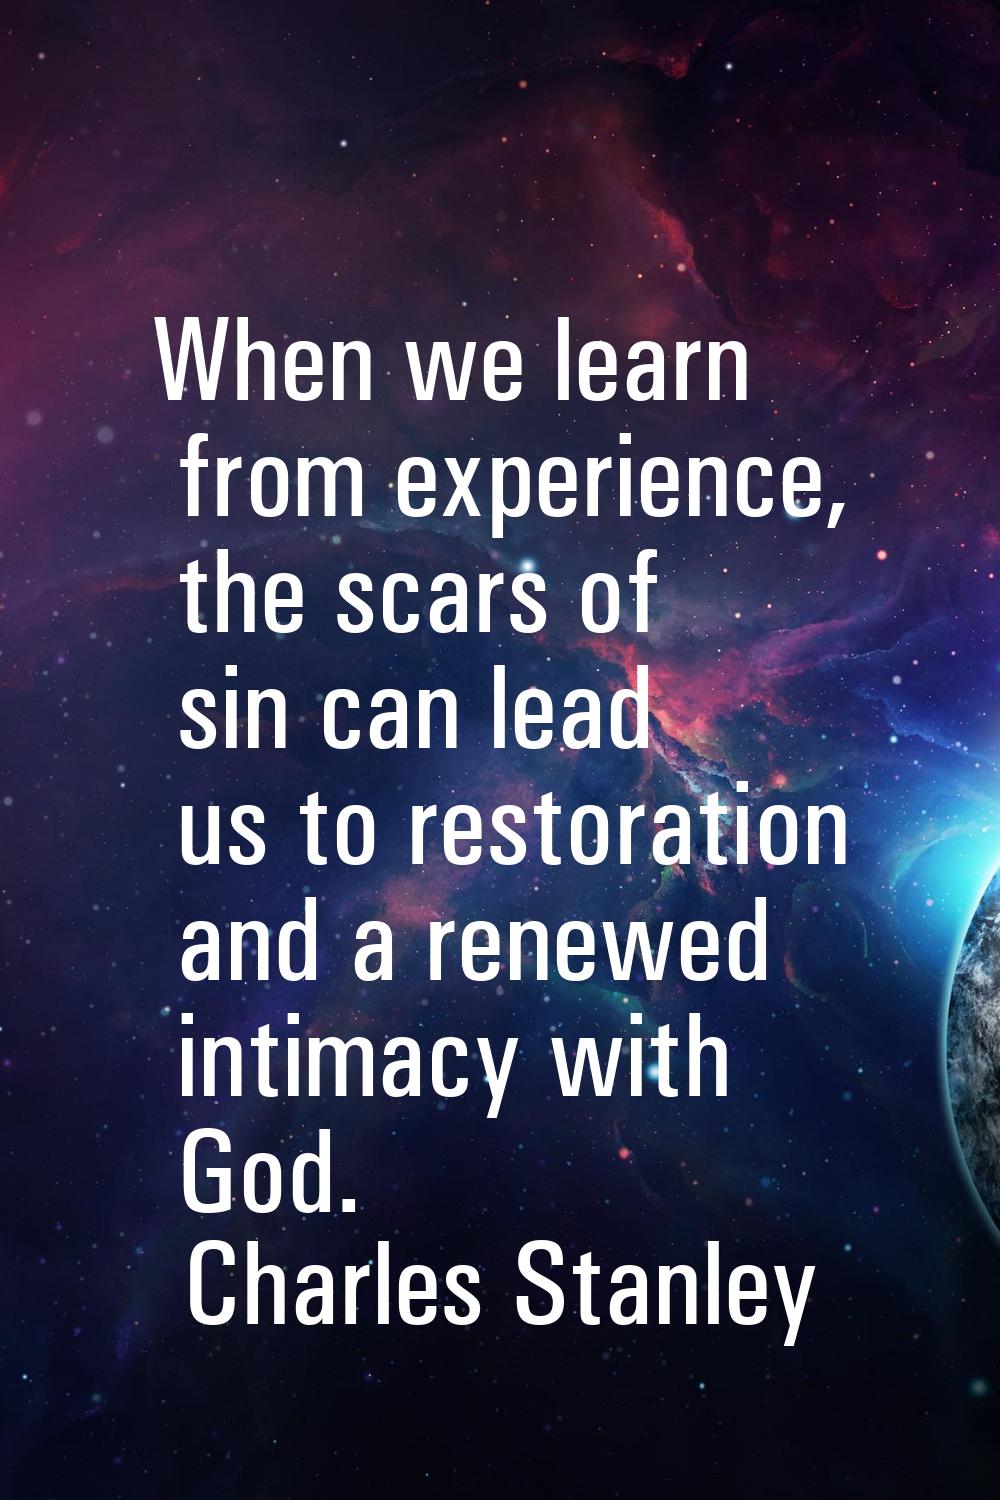 When we learn from experience, the scars of sin can lead us to restoration and a renewed intimacy w